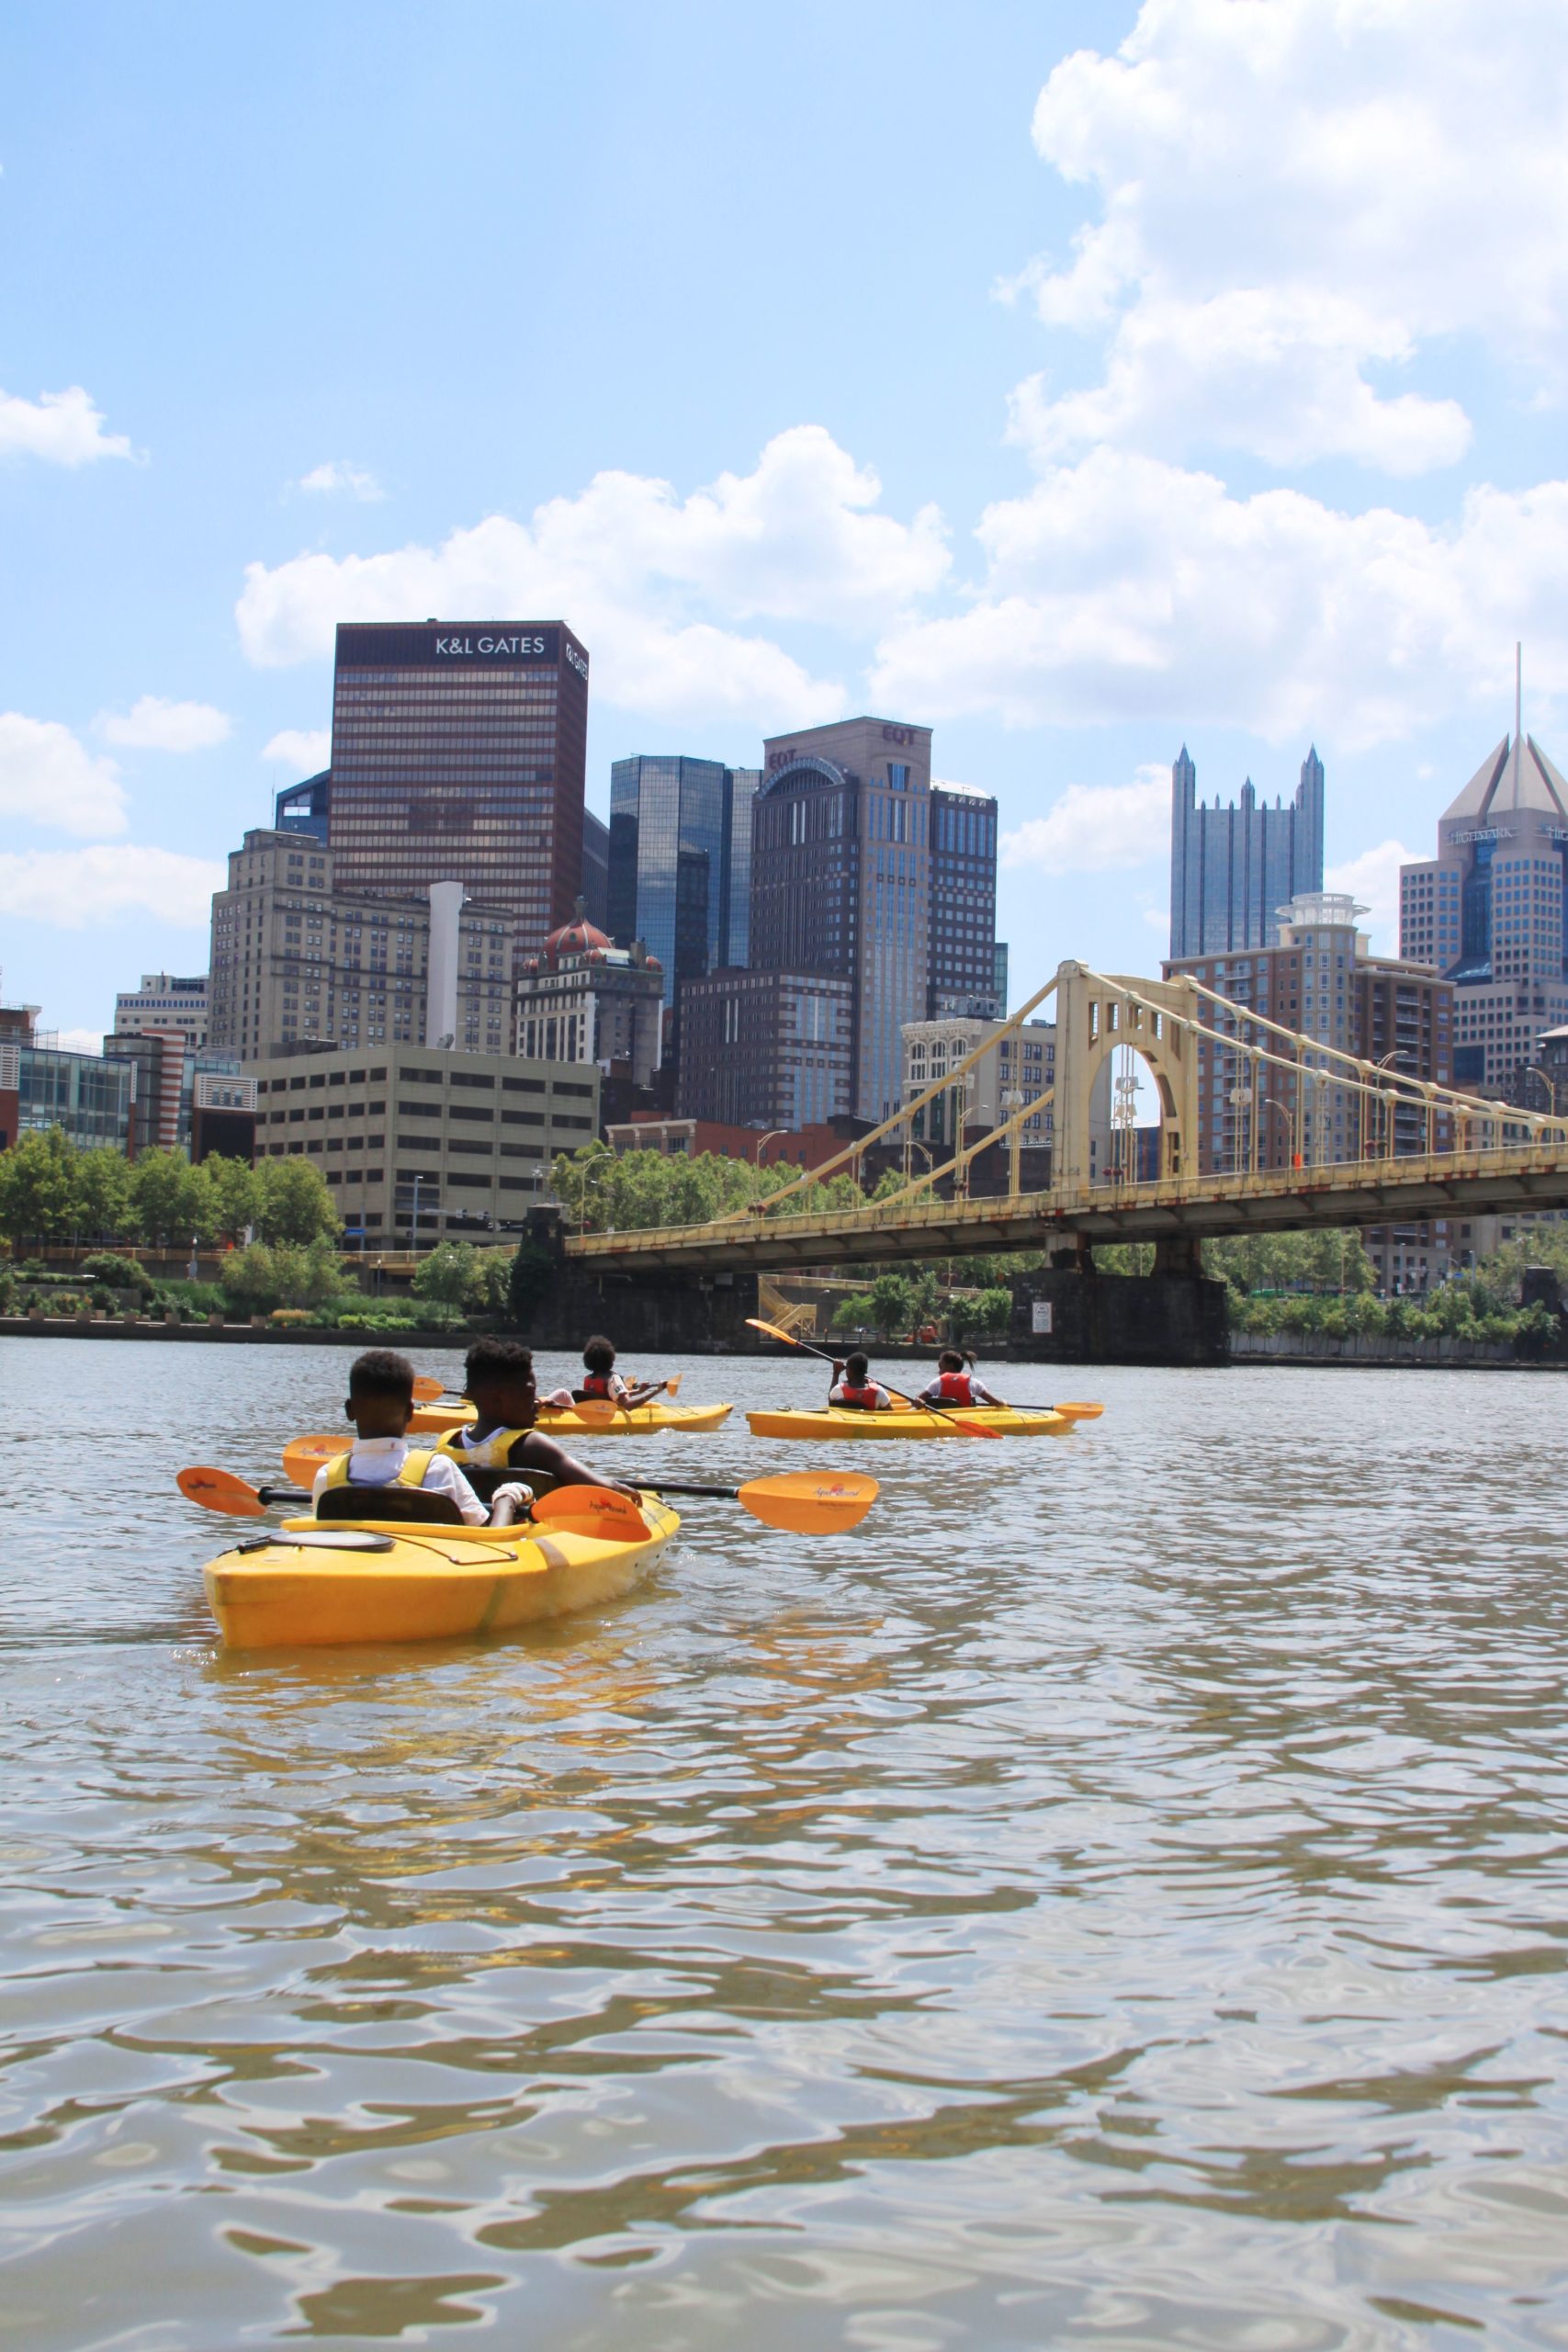 Participants enjoy the view of the Pittsburgh skyline from a kayak.